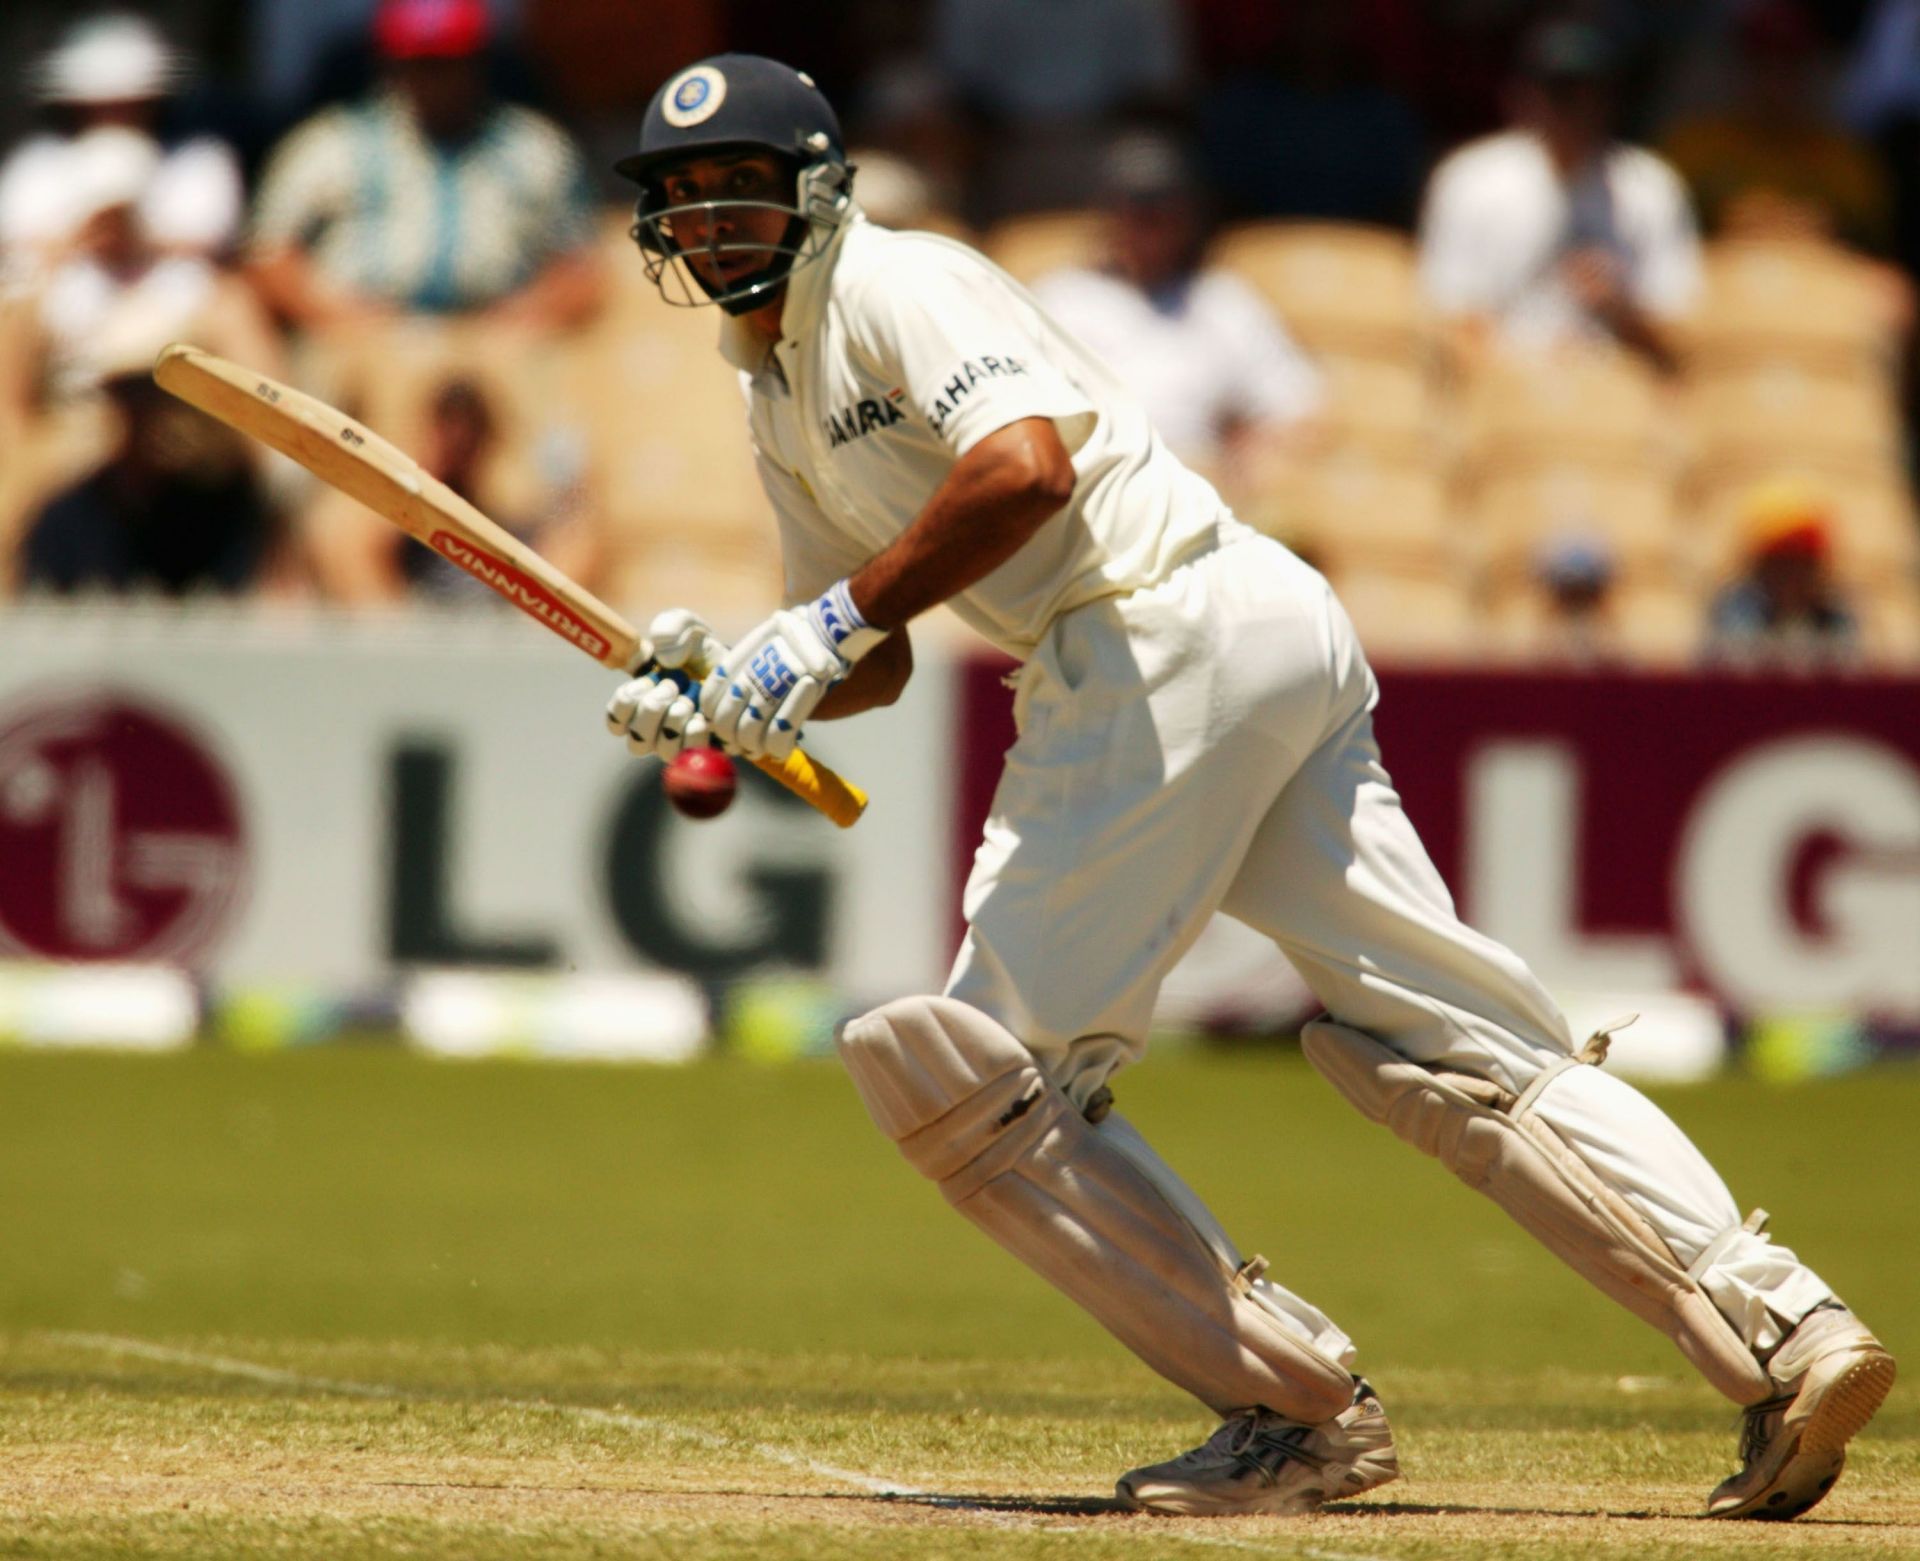 VVS Laxman starred with the bat during India&rsquo;s famous win in Durban in 2010. Pic: Getty Images